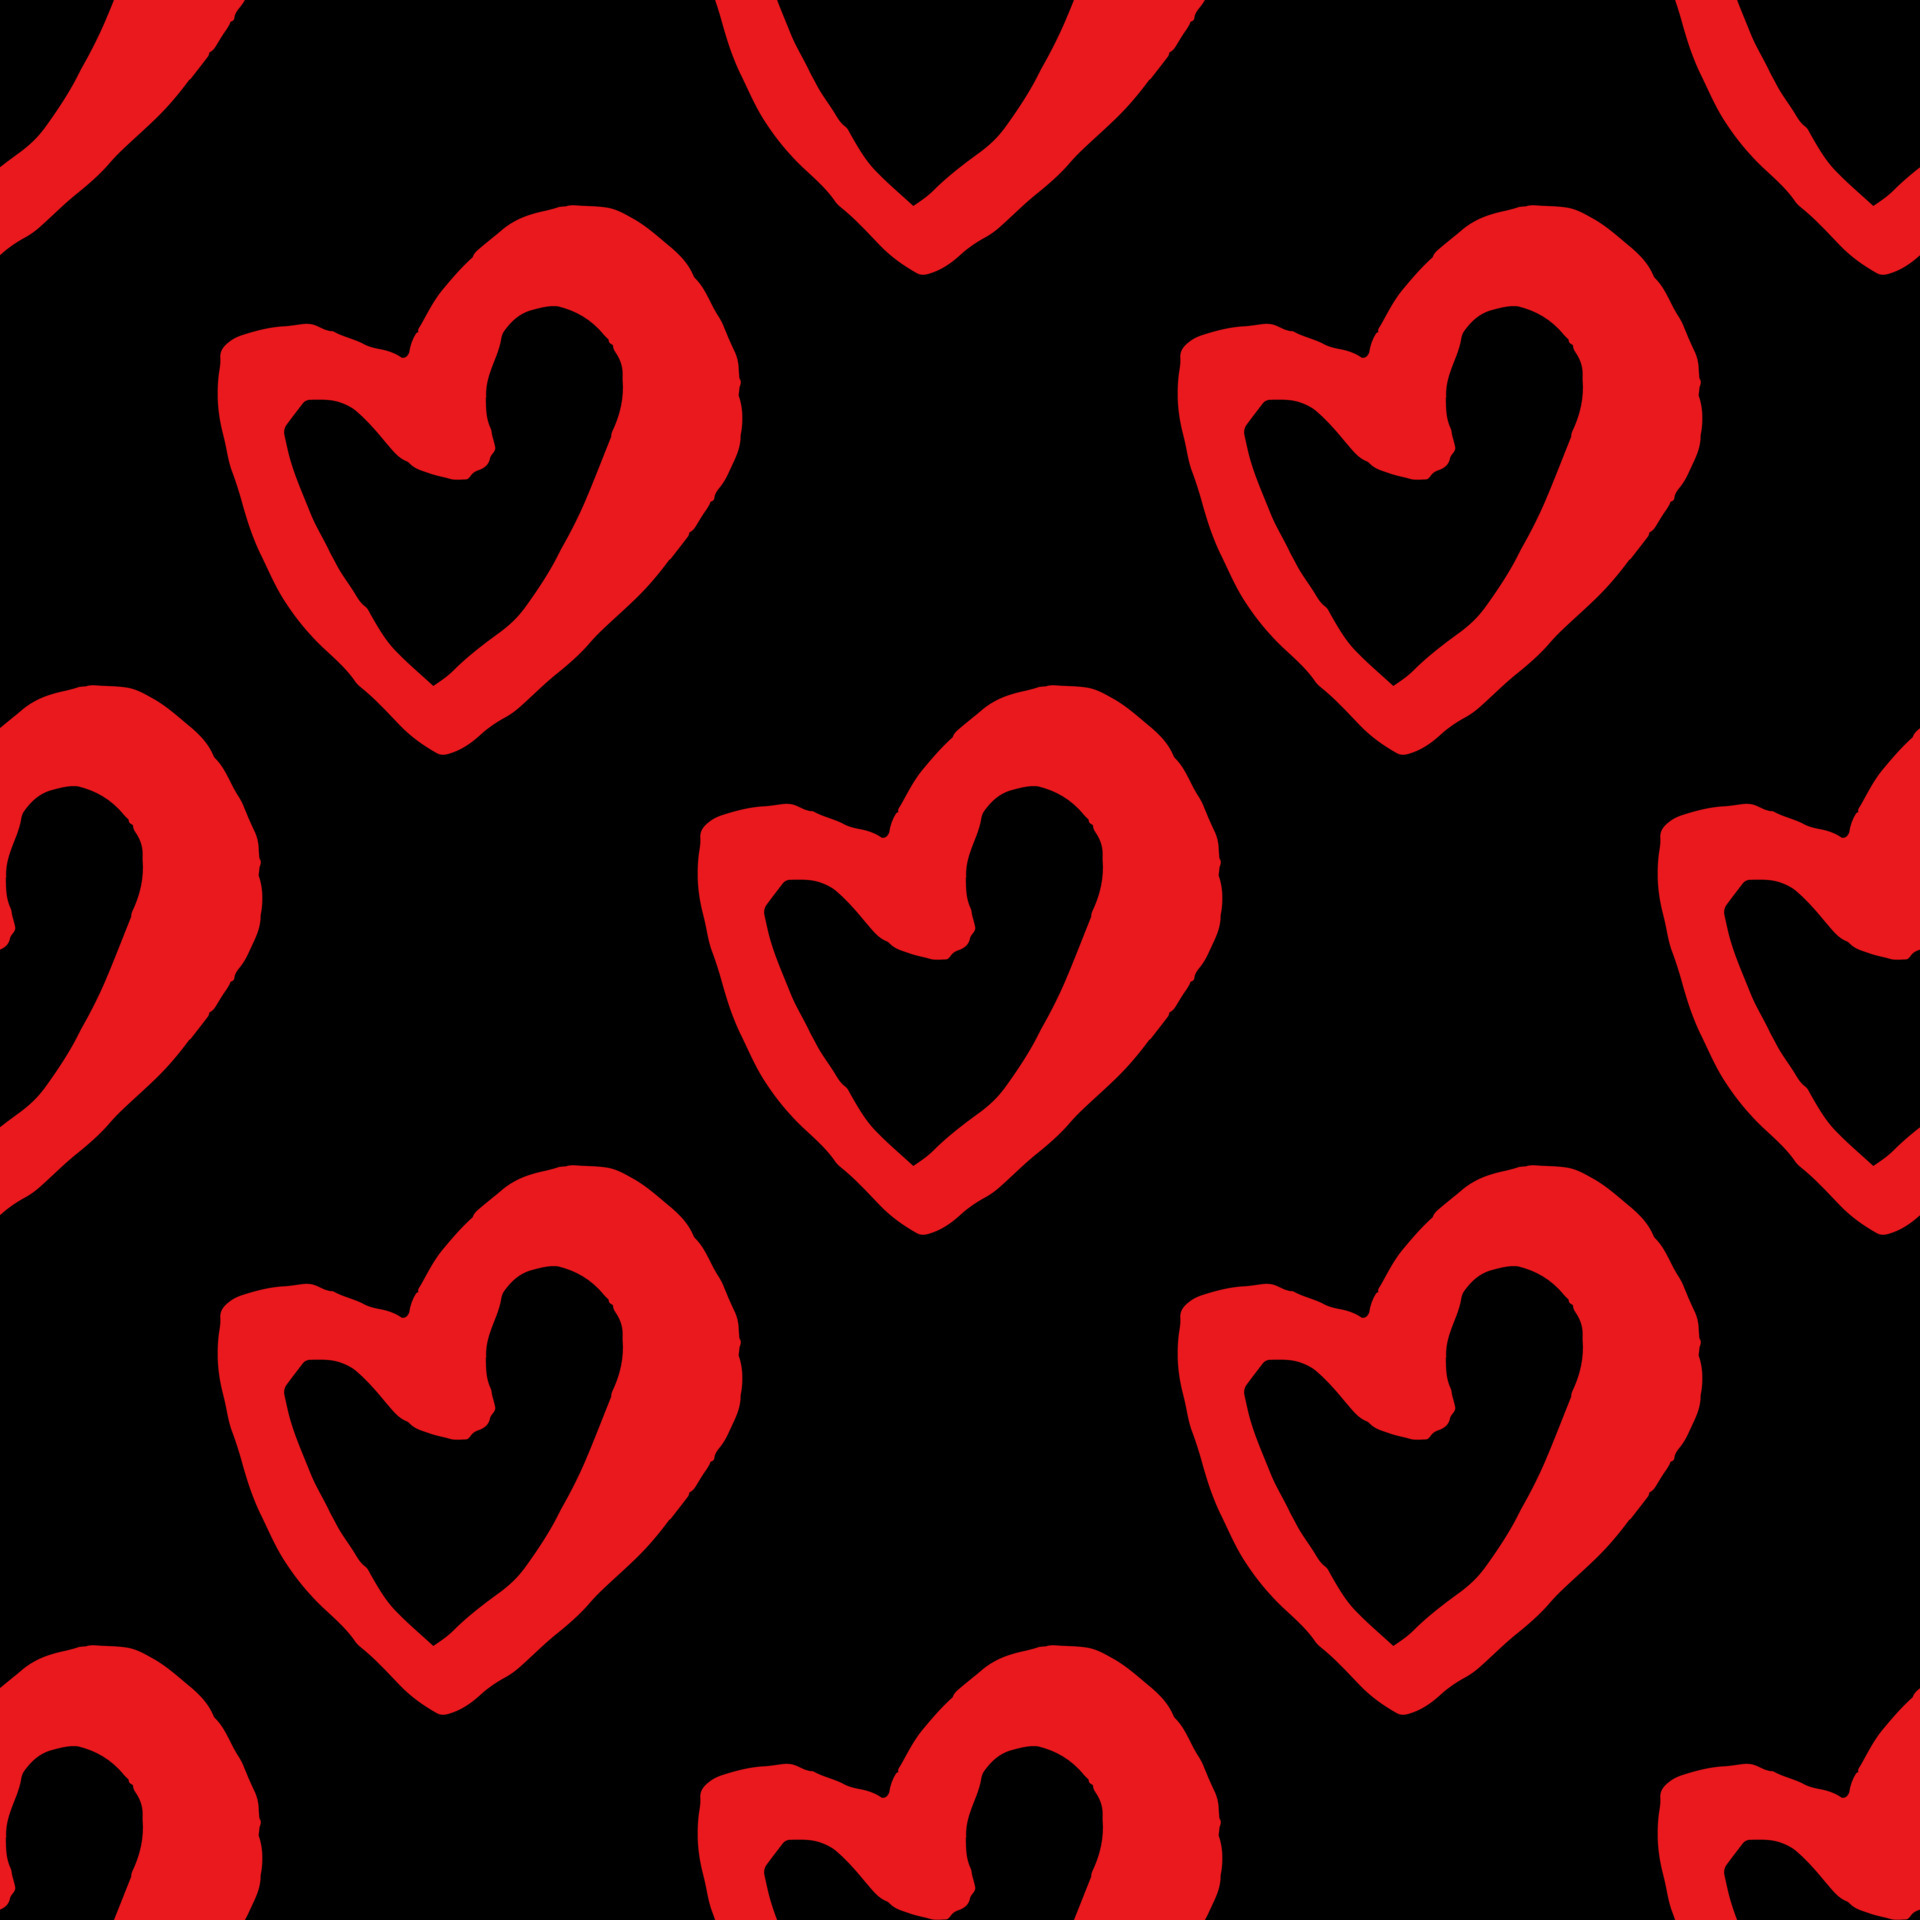 Share more than 59 heart wallpaper red best - in.cdgdbentre